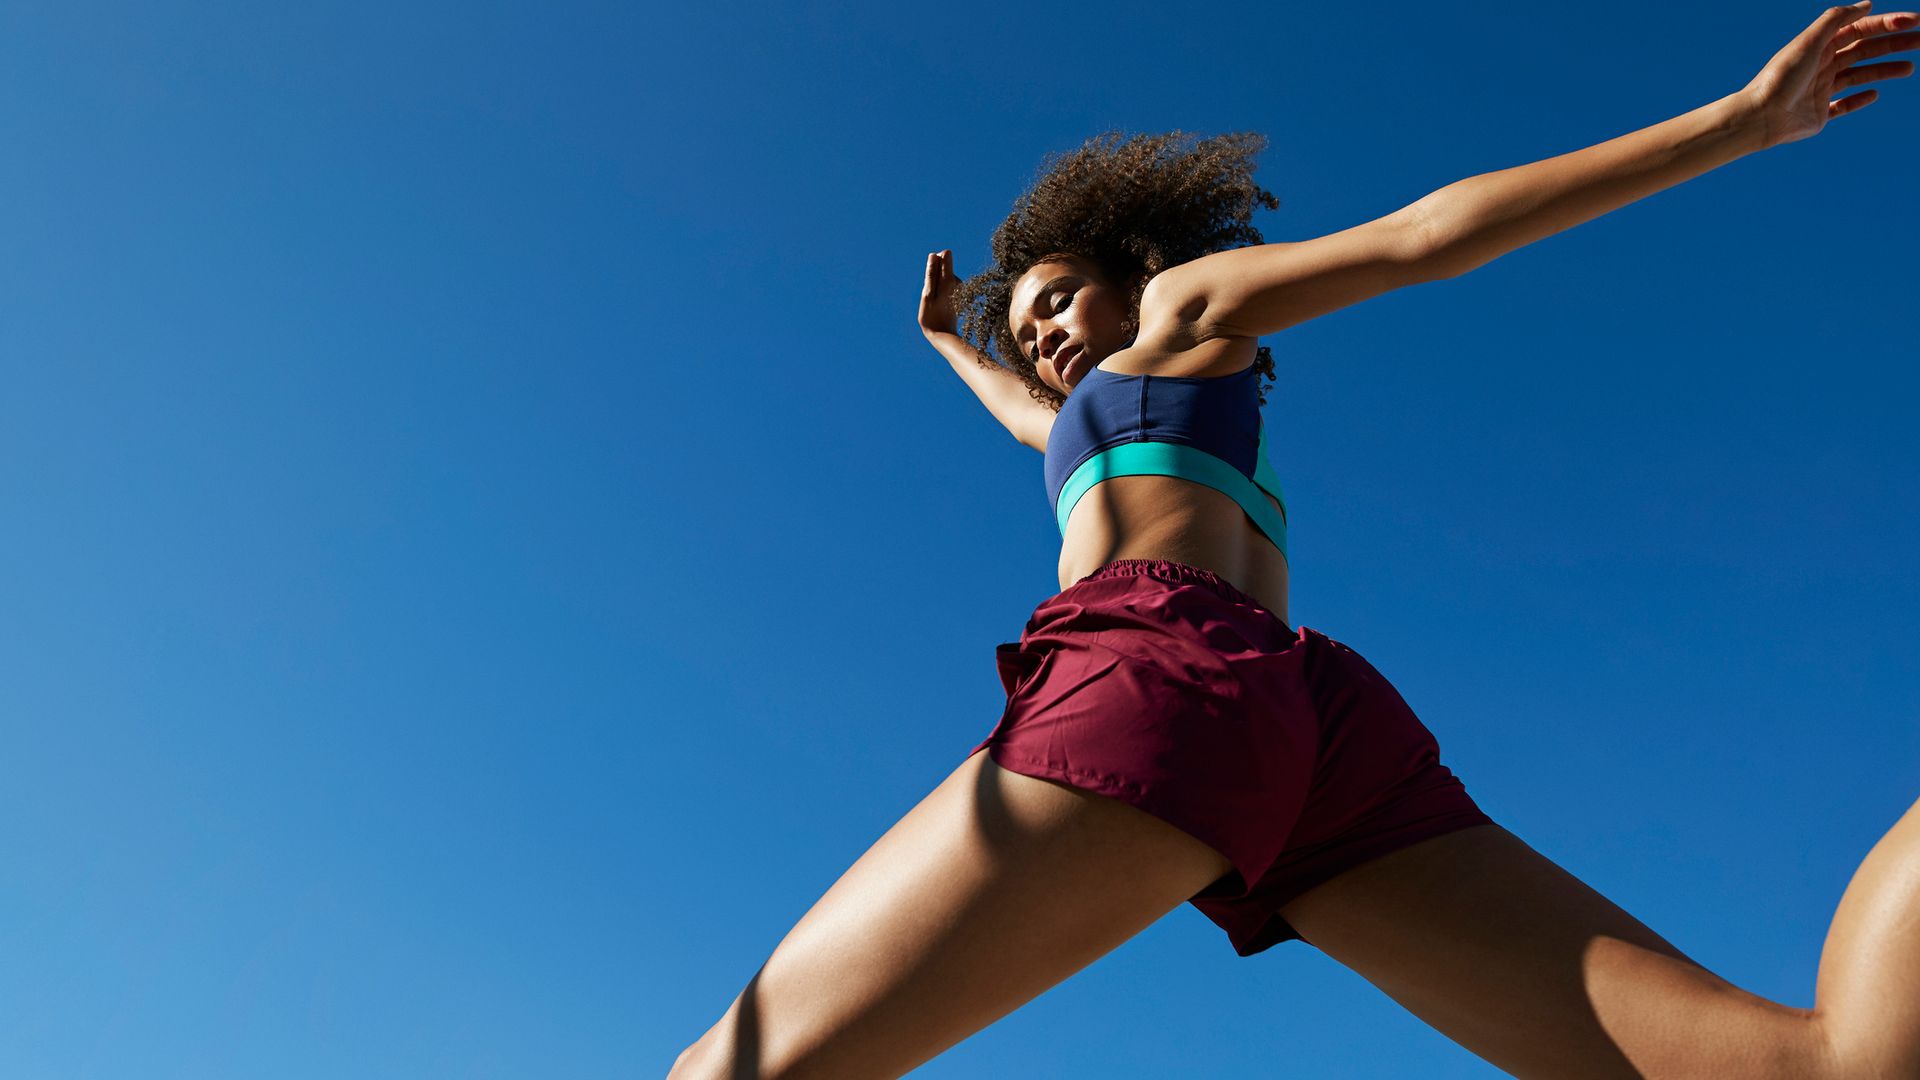 woman jumping against clear blue sky on sunny day